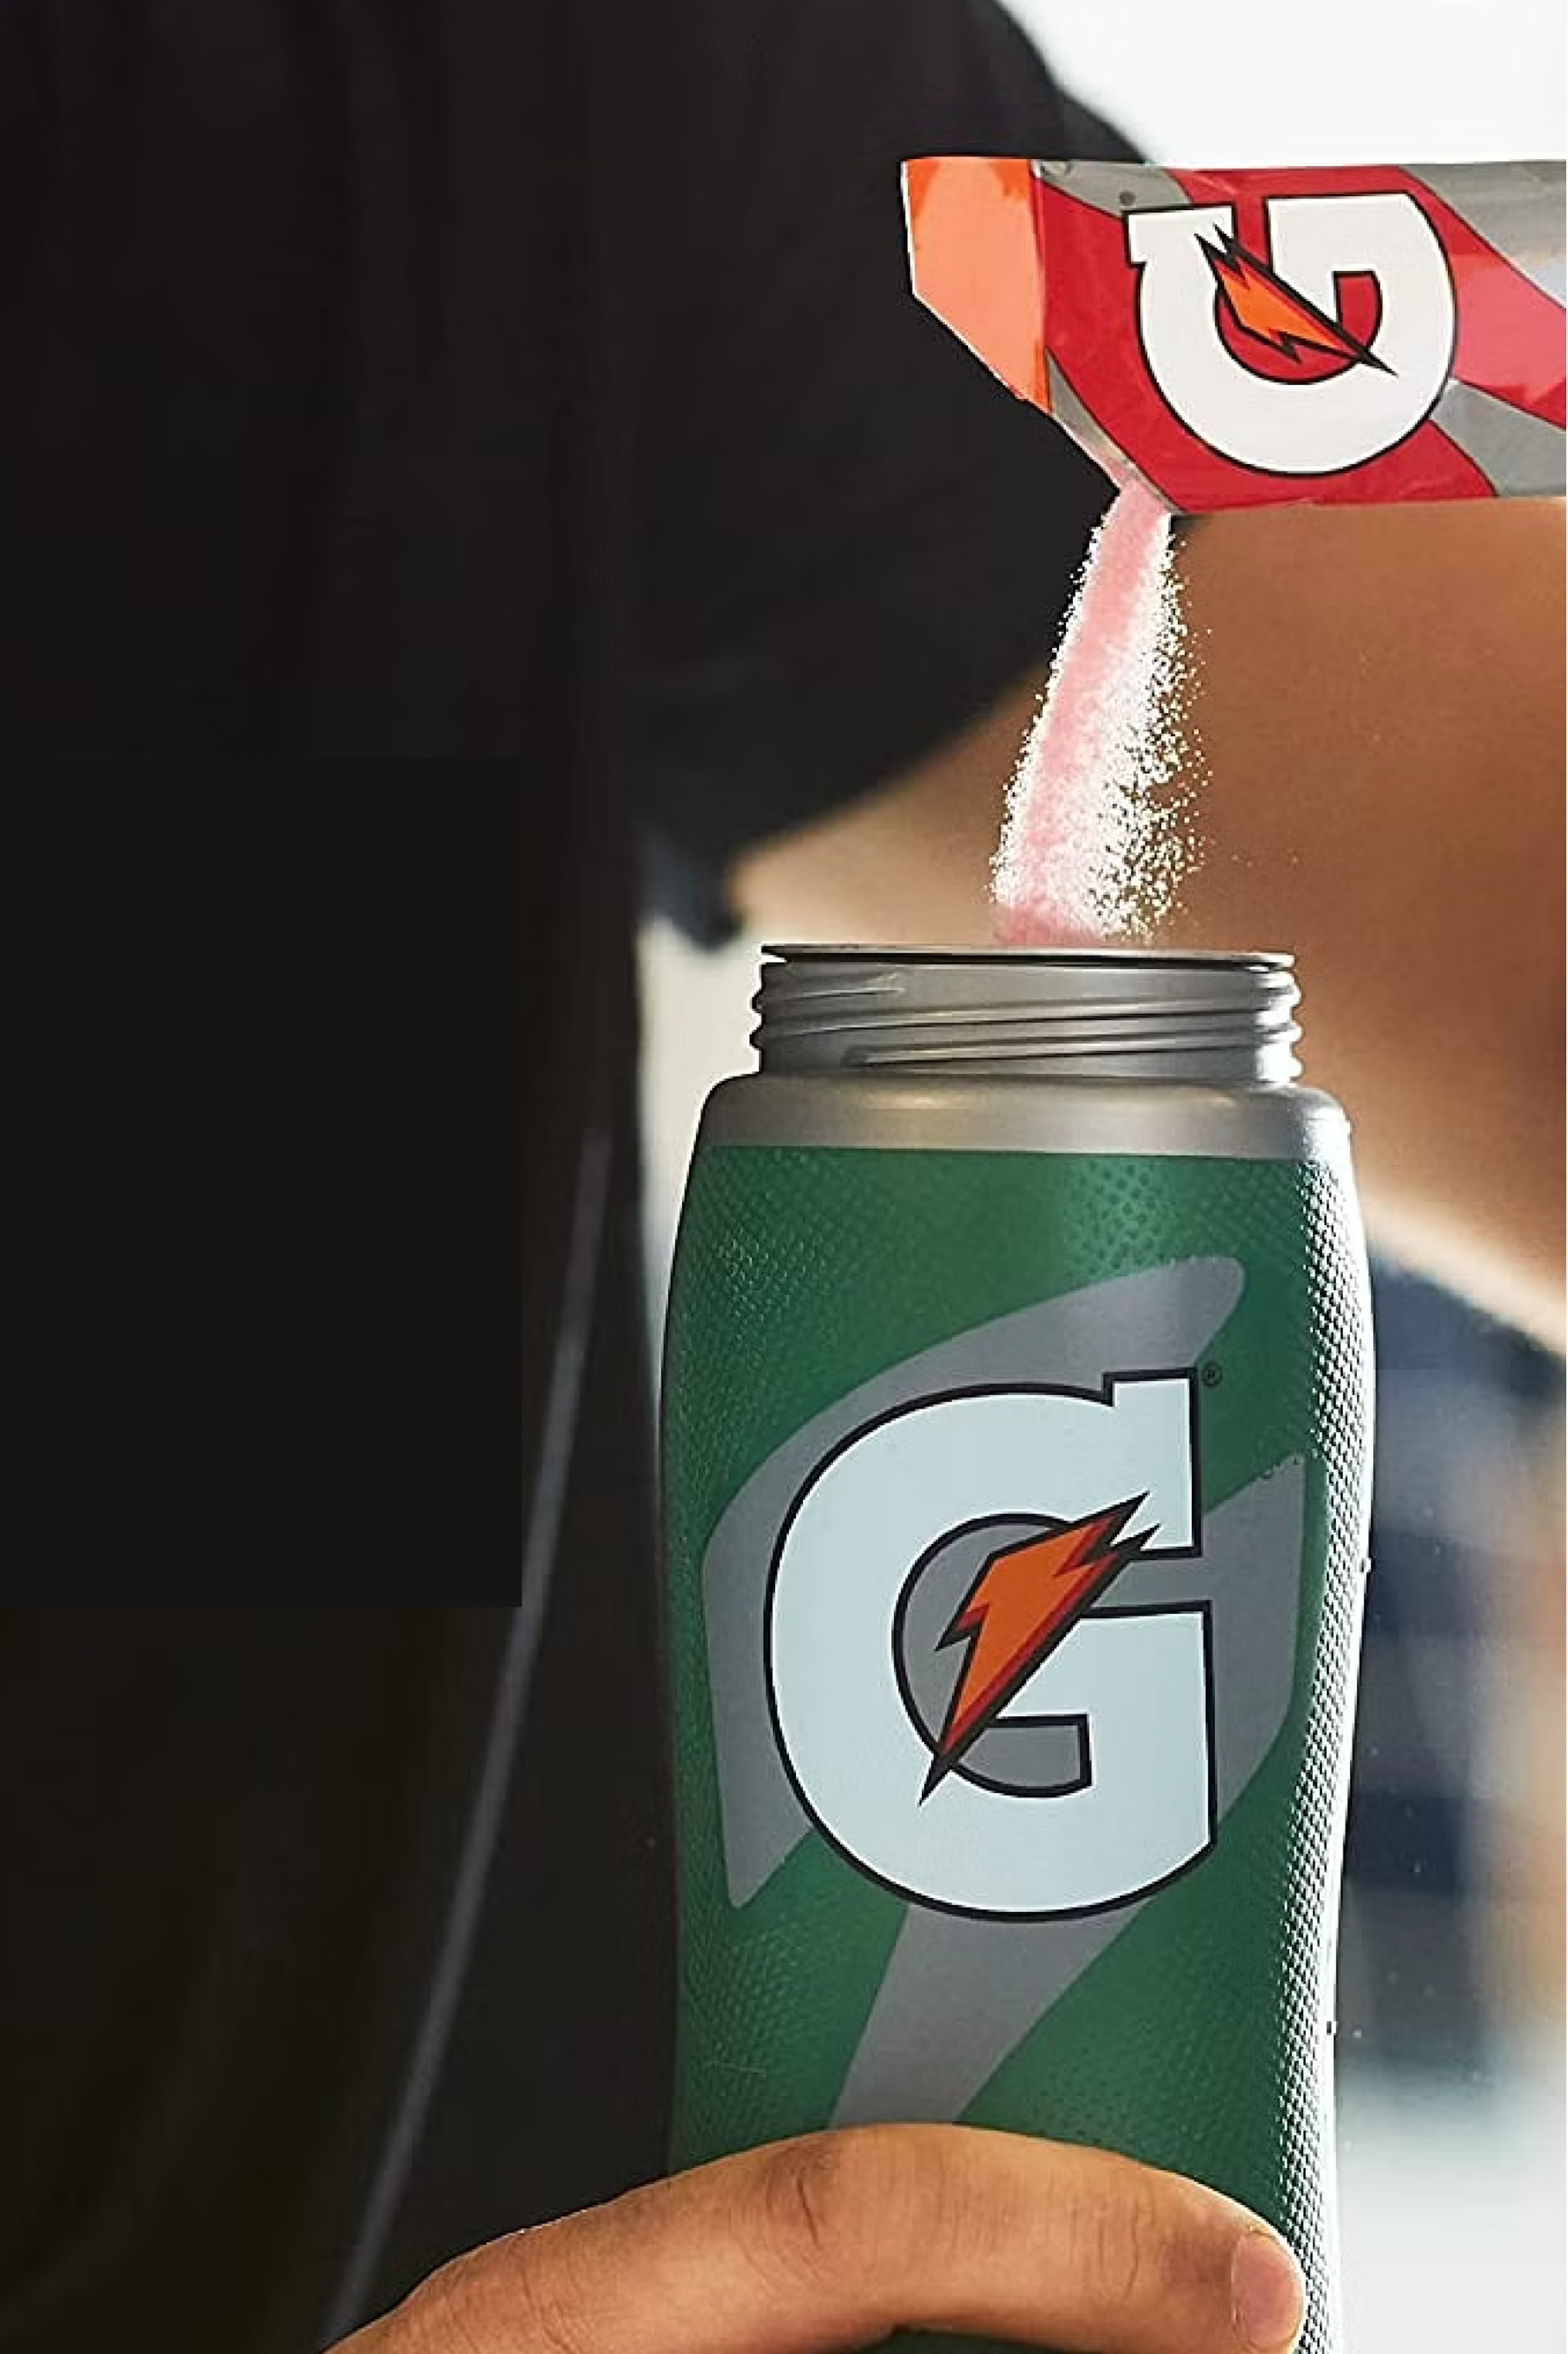 Gatorade thirst quencher fruit punch being poured into Gx bottle